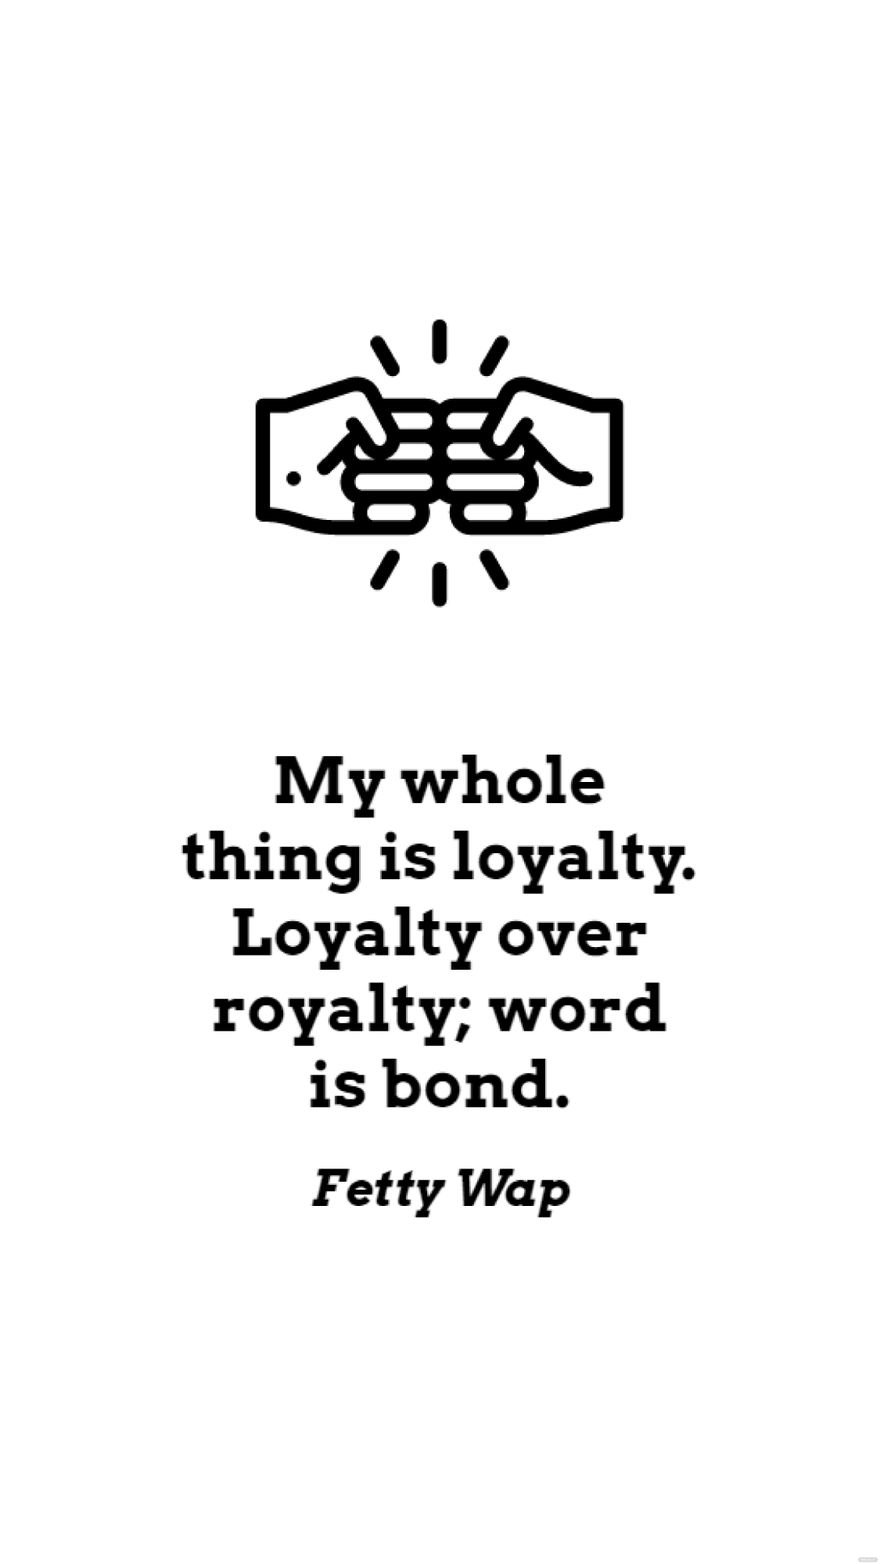 Fetty Wap - My whole thing is loyalty. Loyalty over royalty; word is bond.